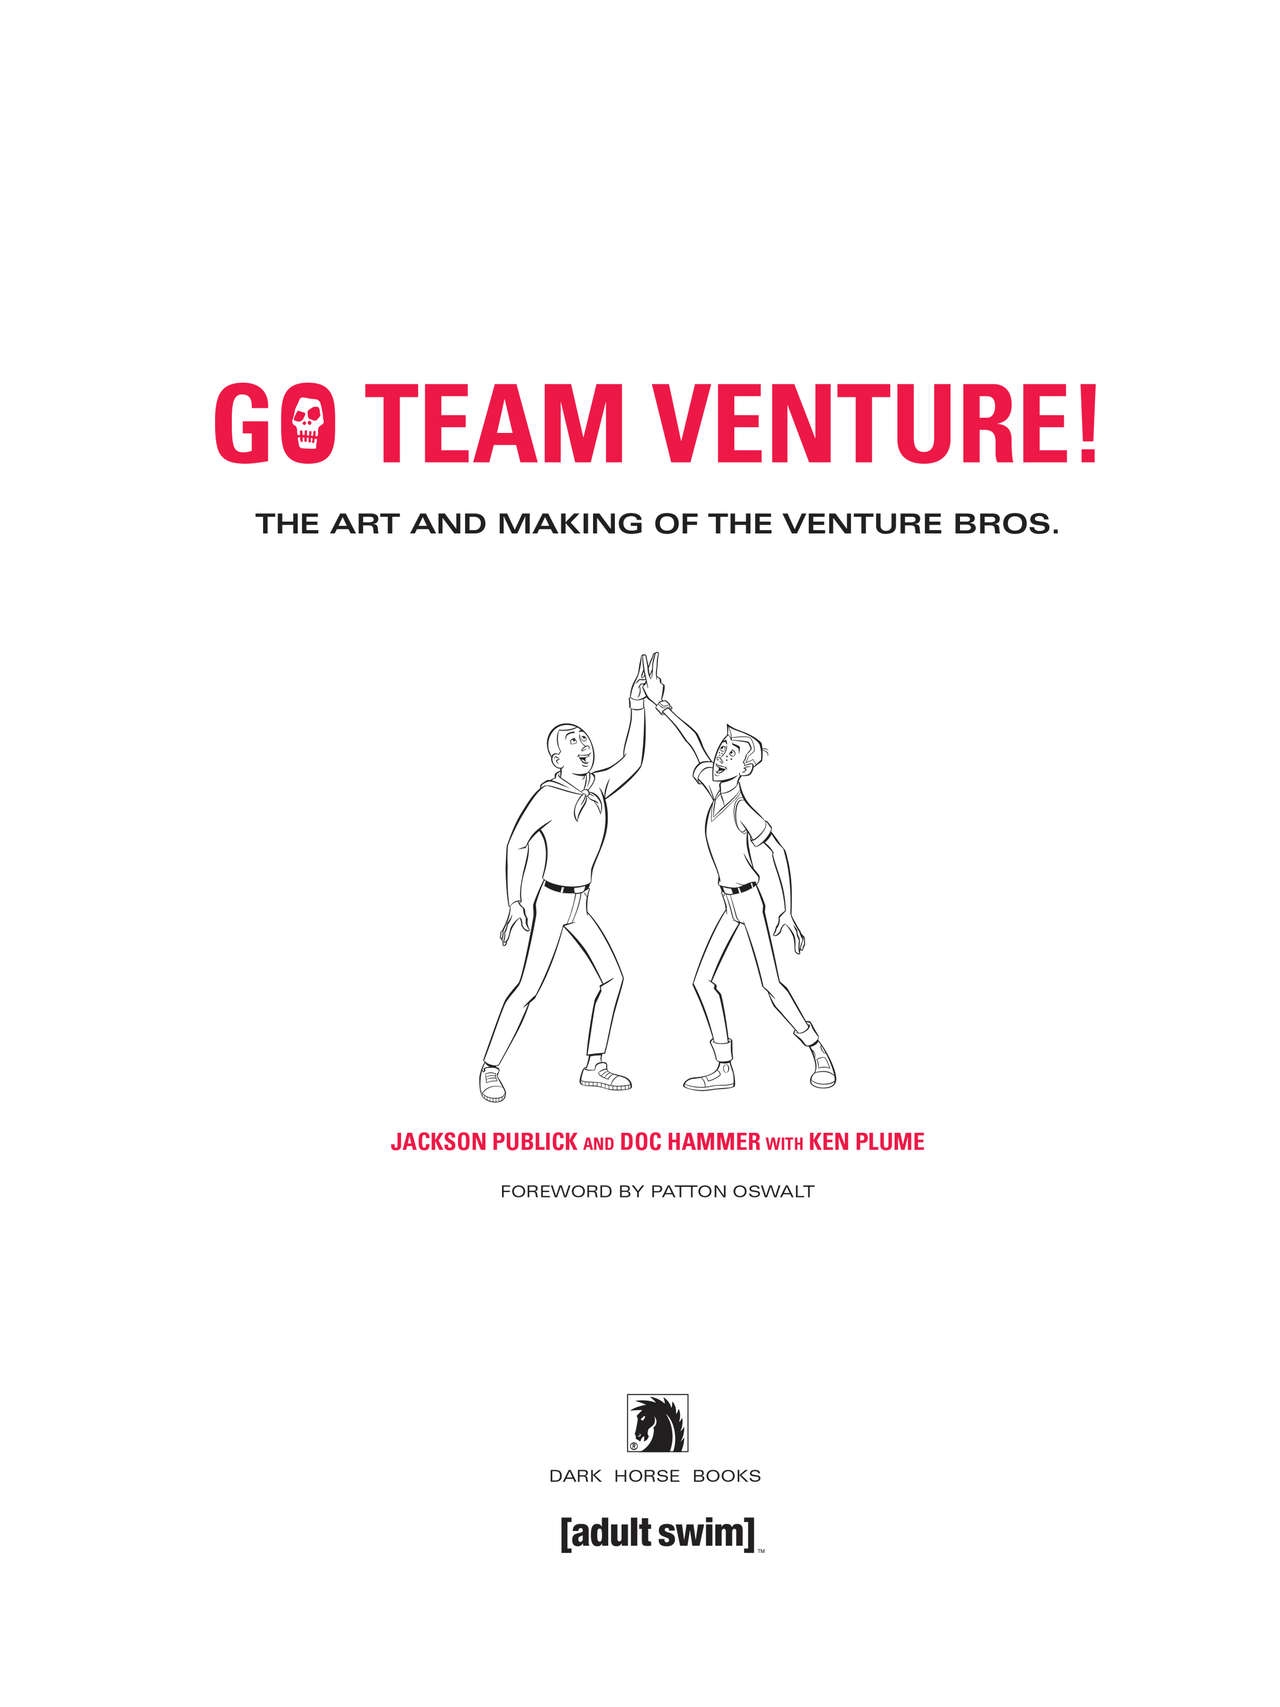 Go Team Venture! - The Art and Making of the Venture Bros 1